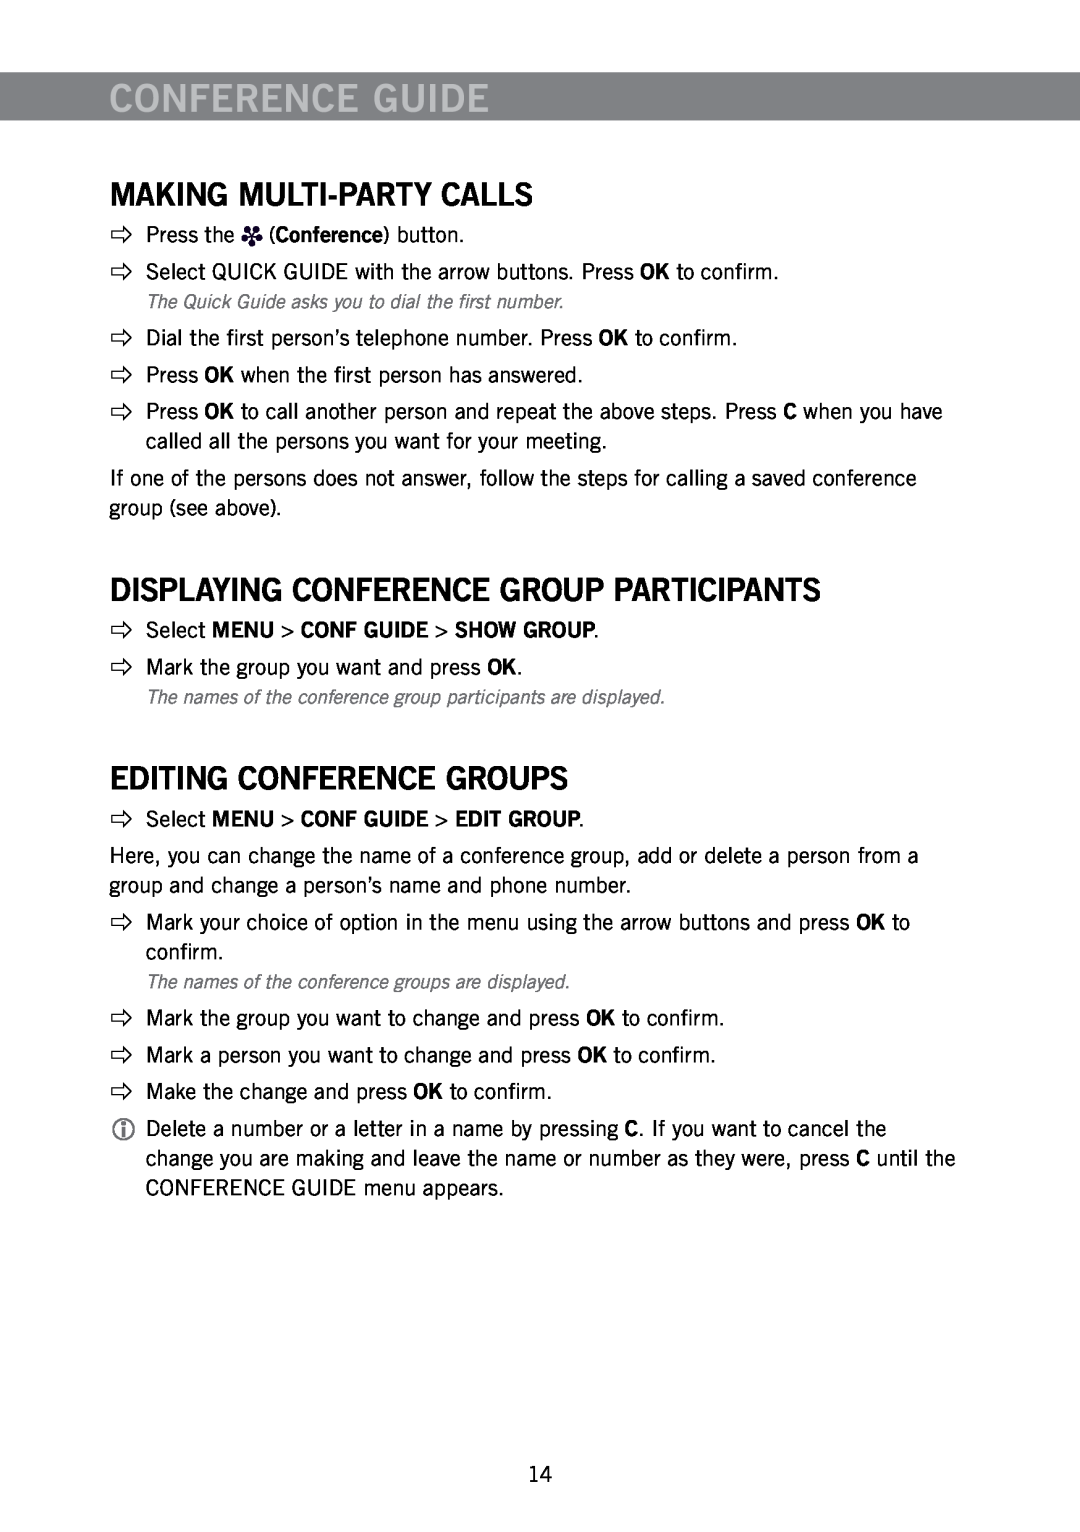 Konftel 300 Conference Guide, Making Multi-Partycalls, Displaying Conference Group Participants, Editing Conference Groups 